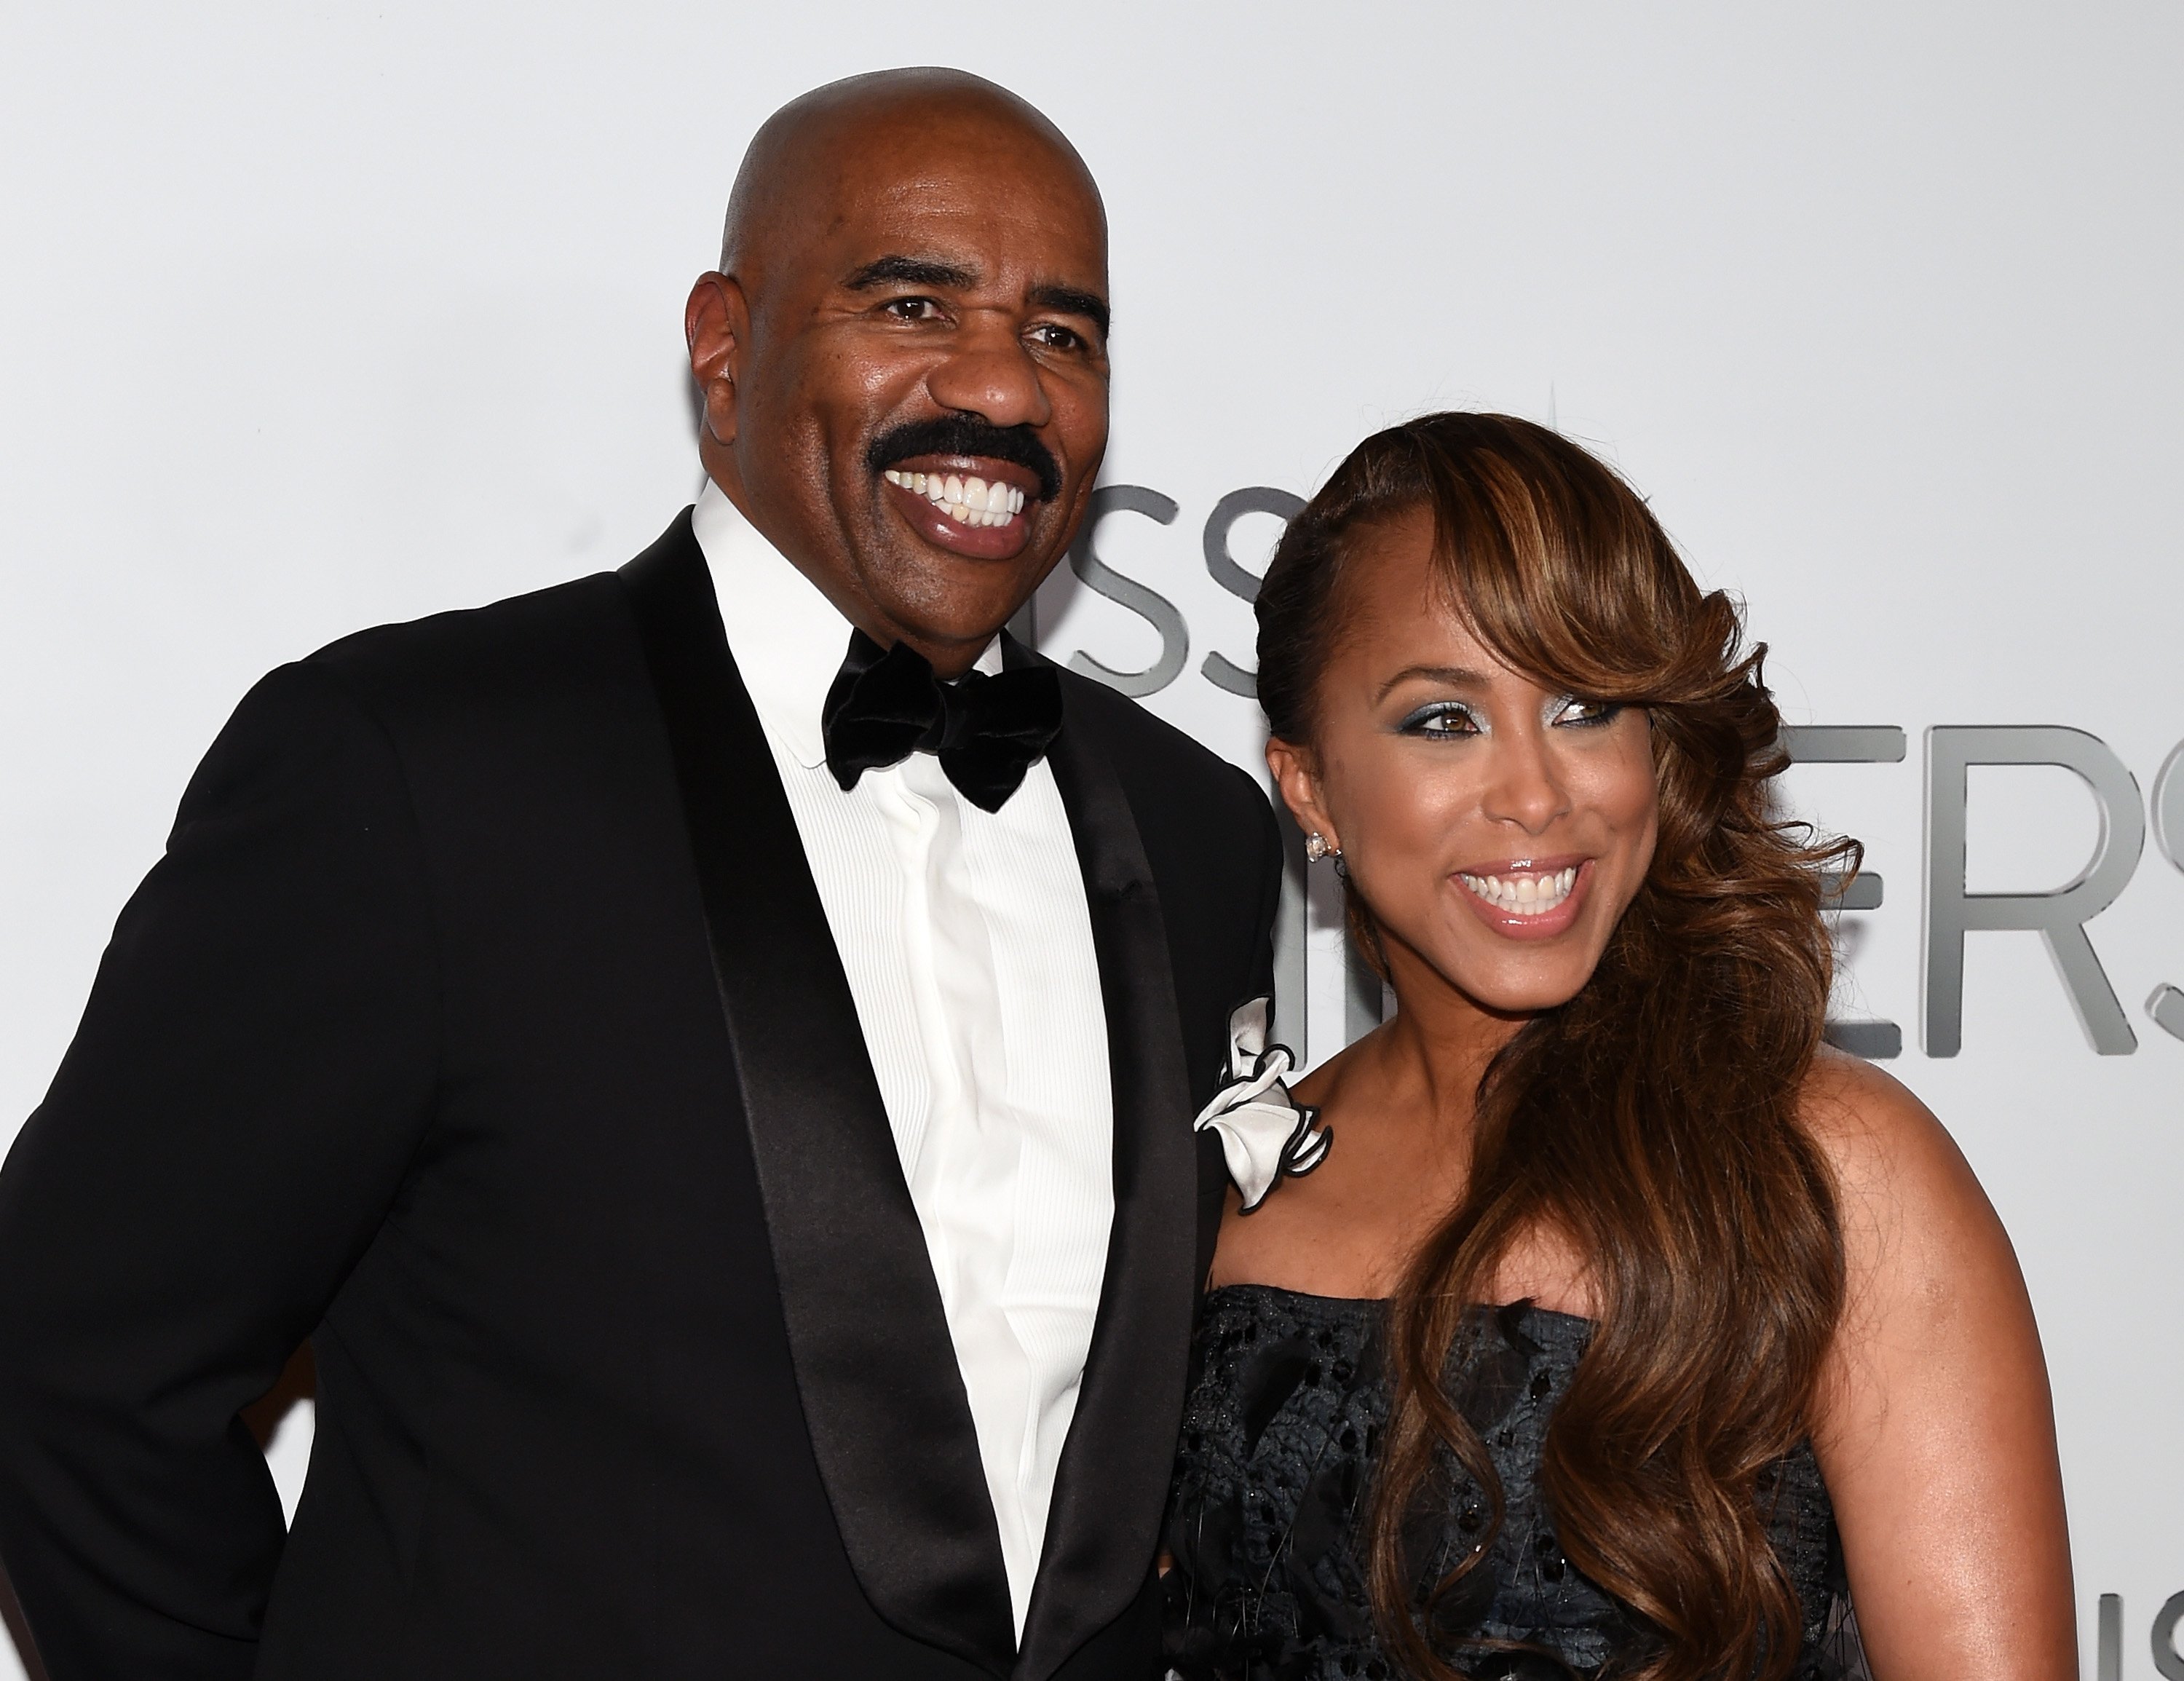 Steve Harvey and Marjorie Harvey at the 2015 Miss Universe Pageant at Planet Hollywood Resort & Casino on December 20, 2015 in Las Vegas, Nevada.| Source: Getty Images